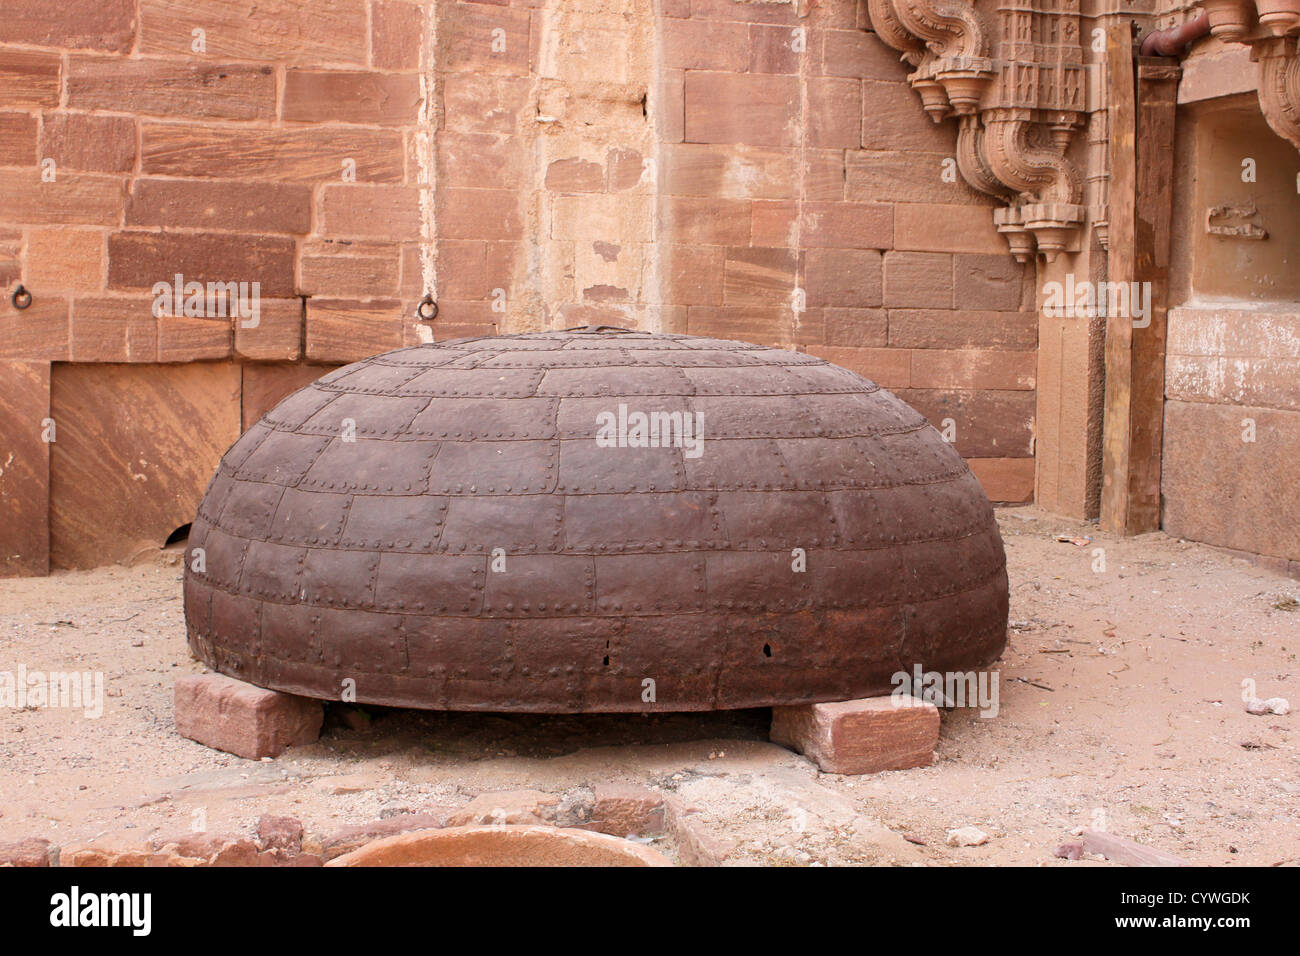 Giant cooking kitchen utensil used to cook for huge number of people in palace Stock Photo